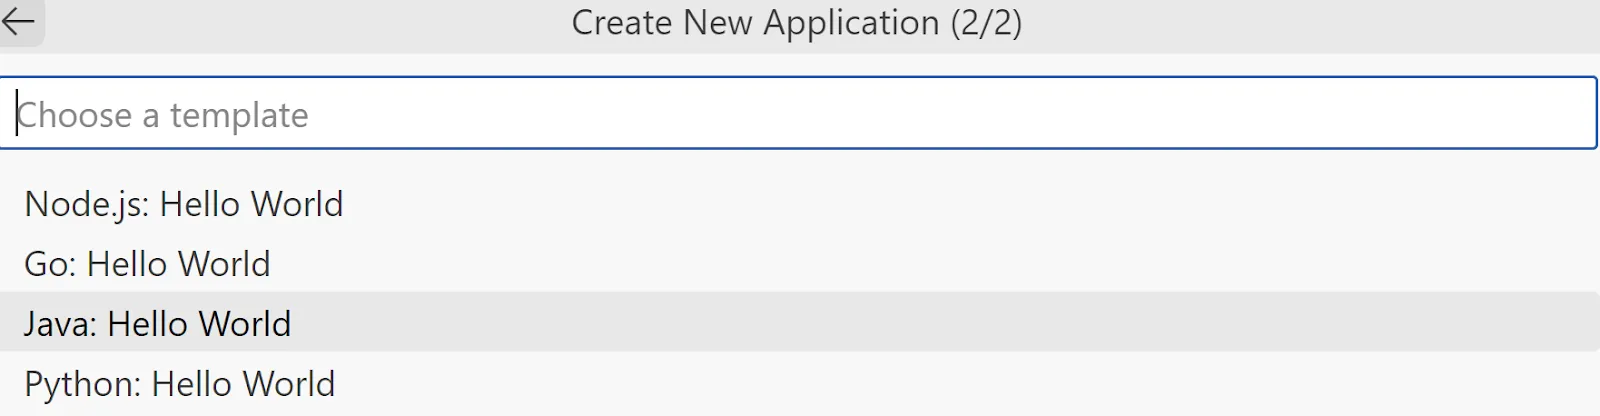 Create New Application pop up page 2